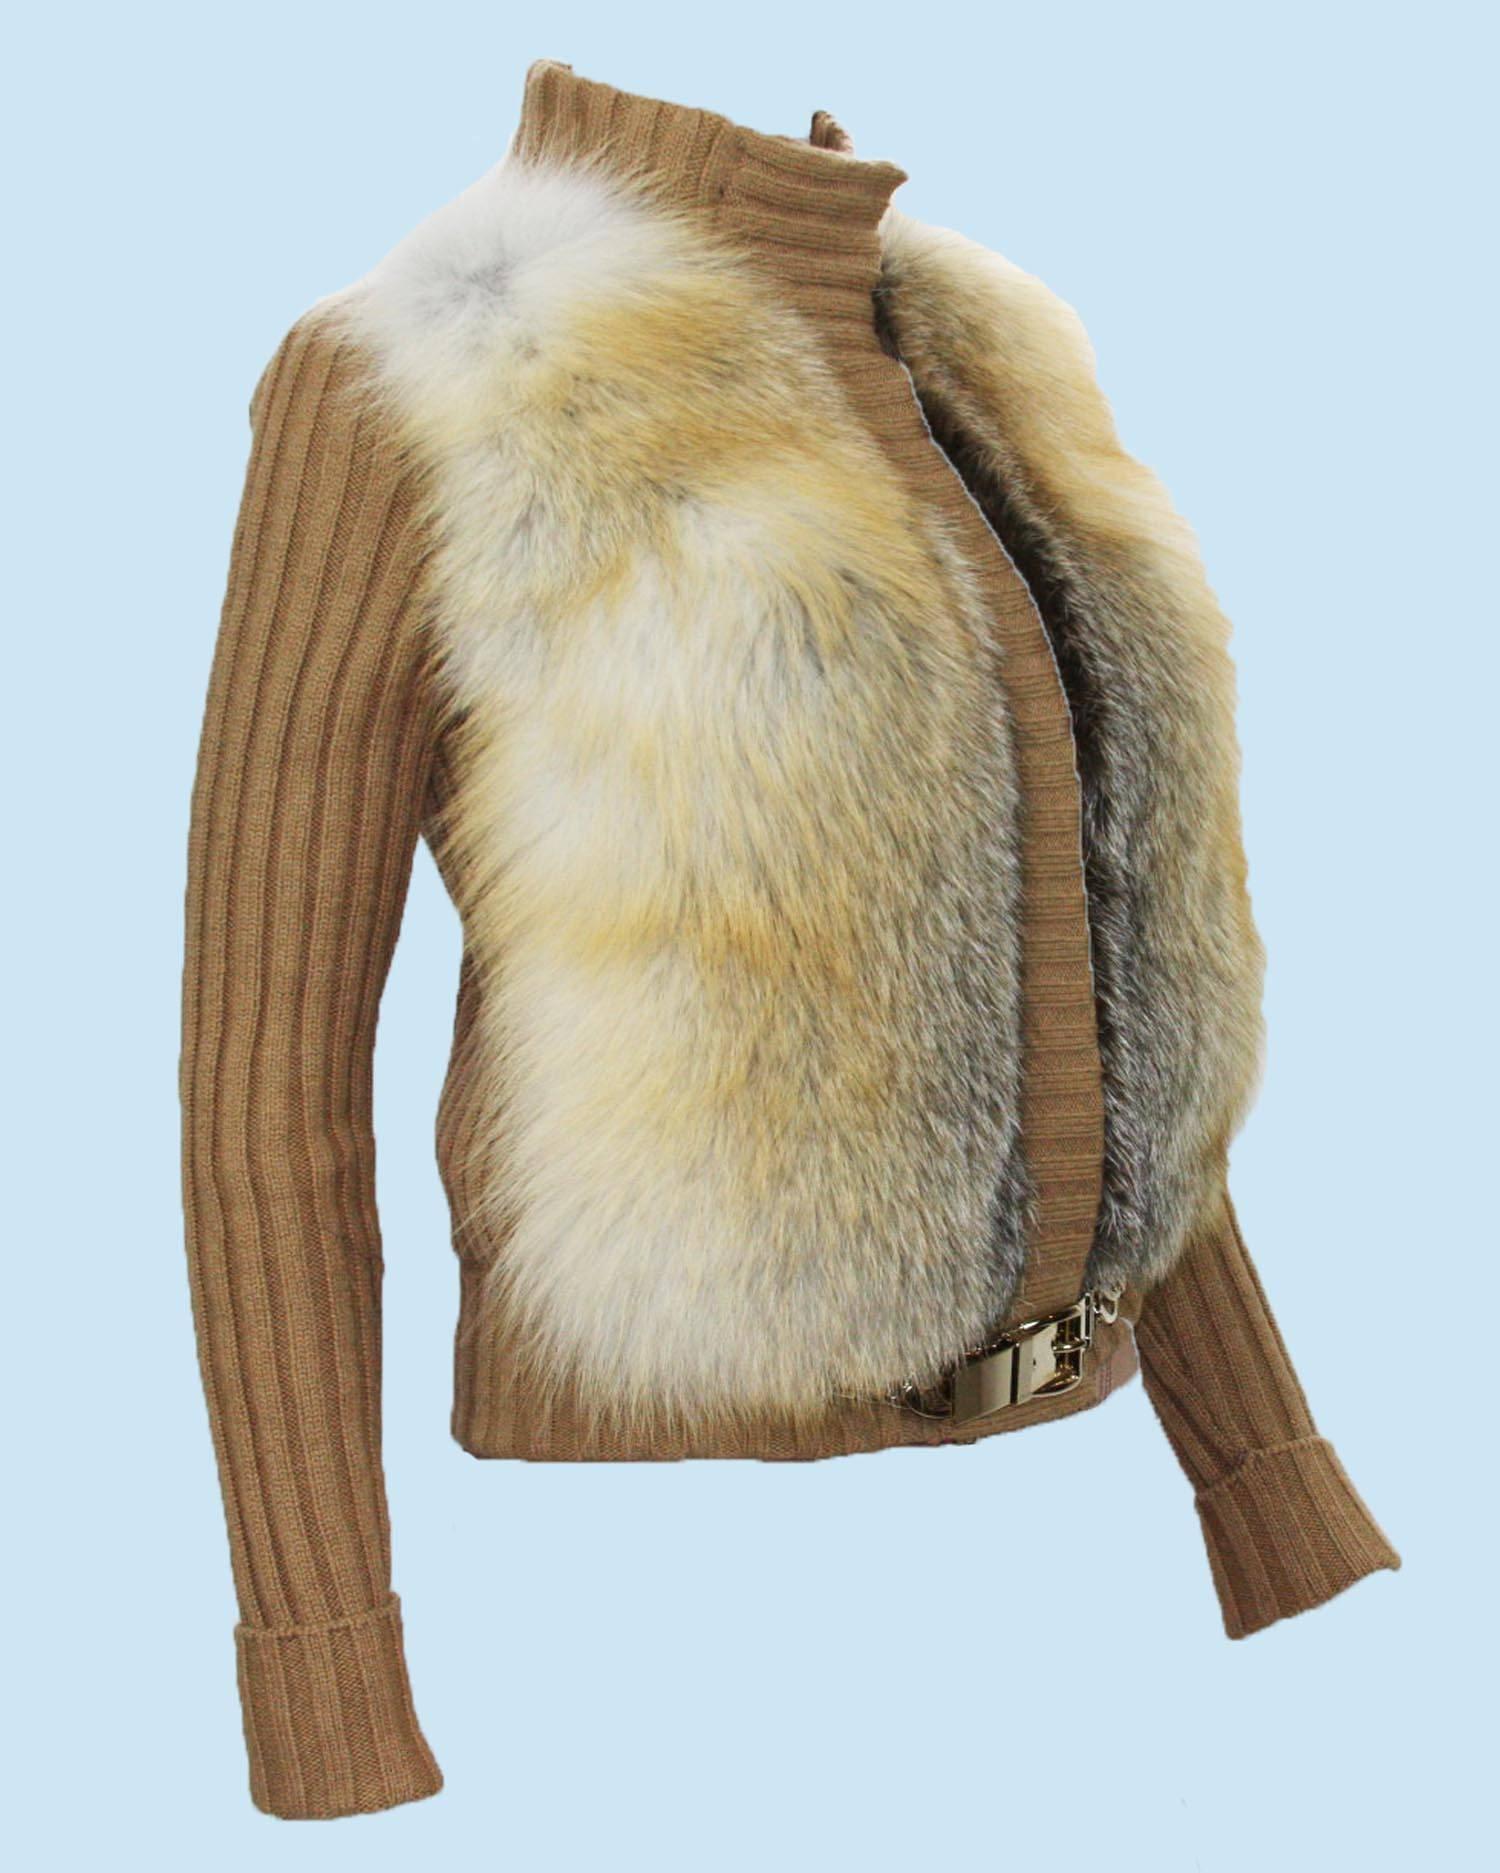 GUCCI KNIT CARDIGAN WITH FOX FUR

Beige knitted cardigan with Fox Fur from Gucci featuring a funnel neck with concealed front fastening and gold chain buckle detail to the front.

100% Camel Hair

Size S

The shoulders are 16 inches across